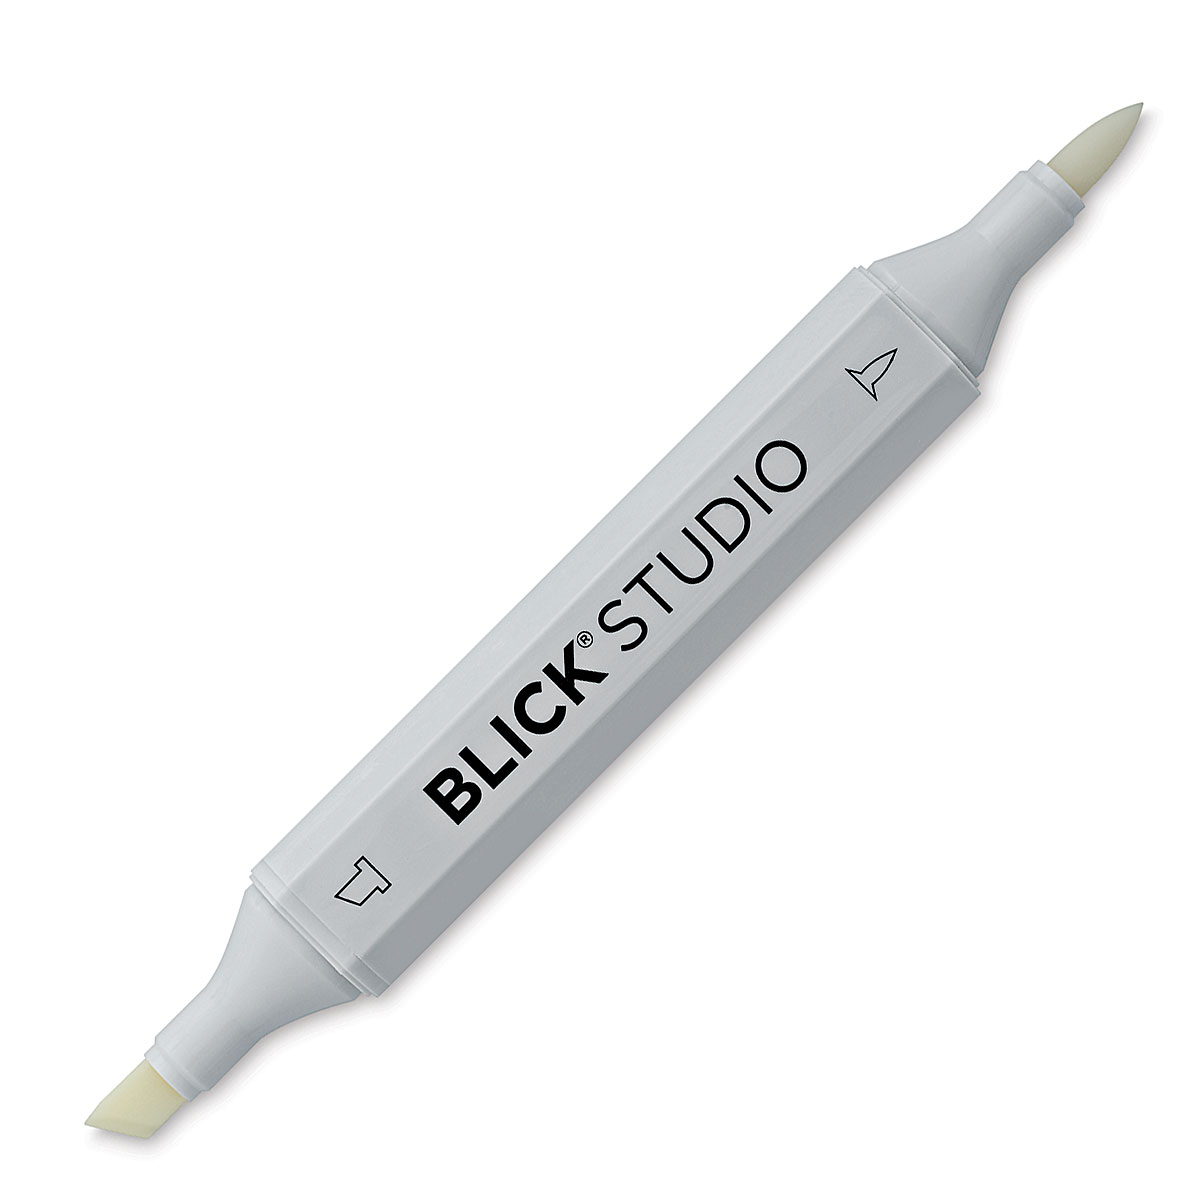 Blick Studio Brush Markers 096pc. Color Wheel Set by 